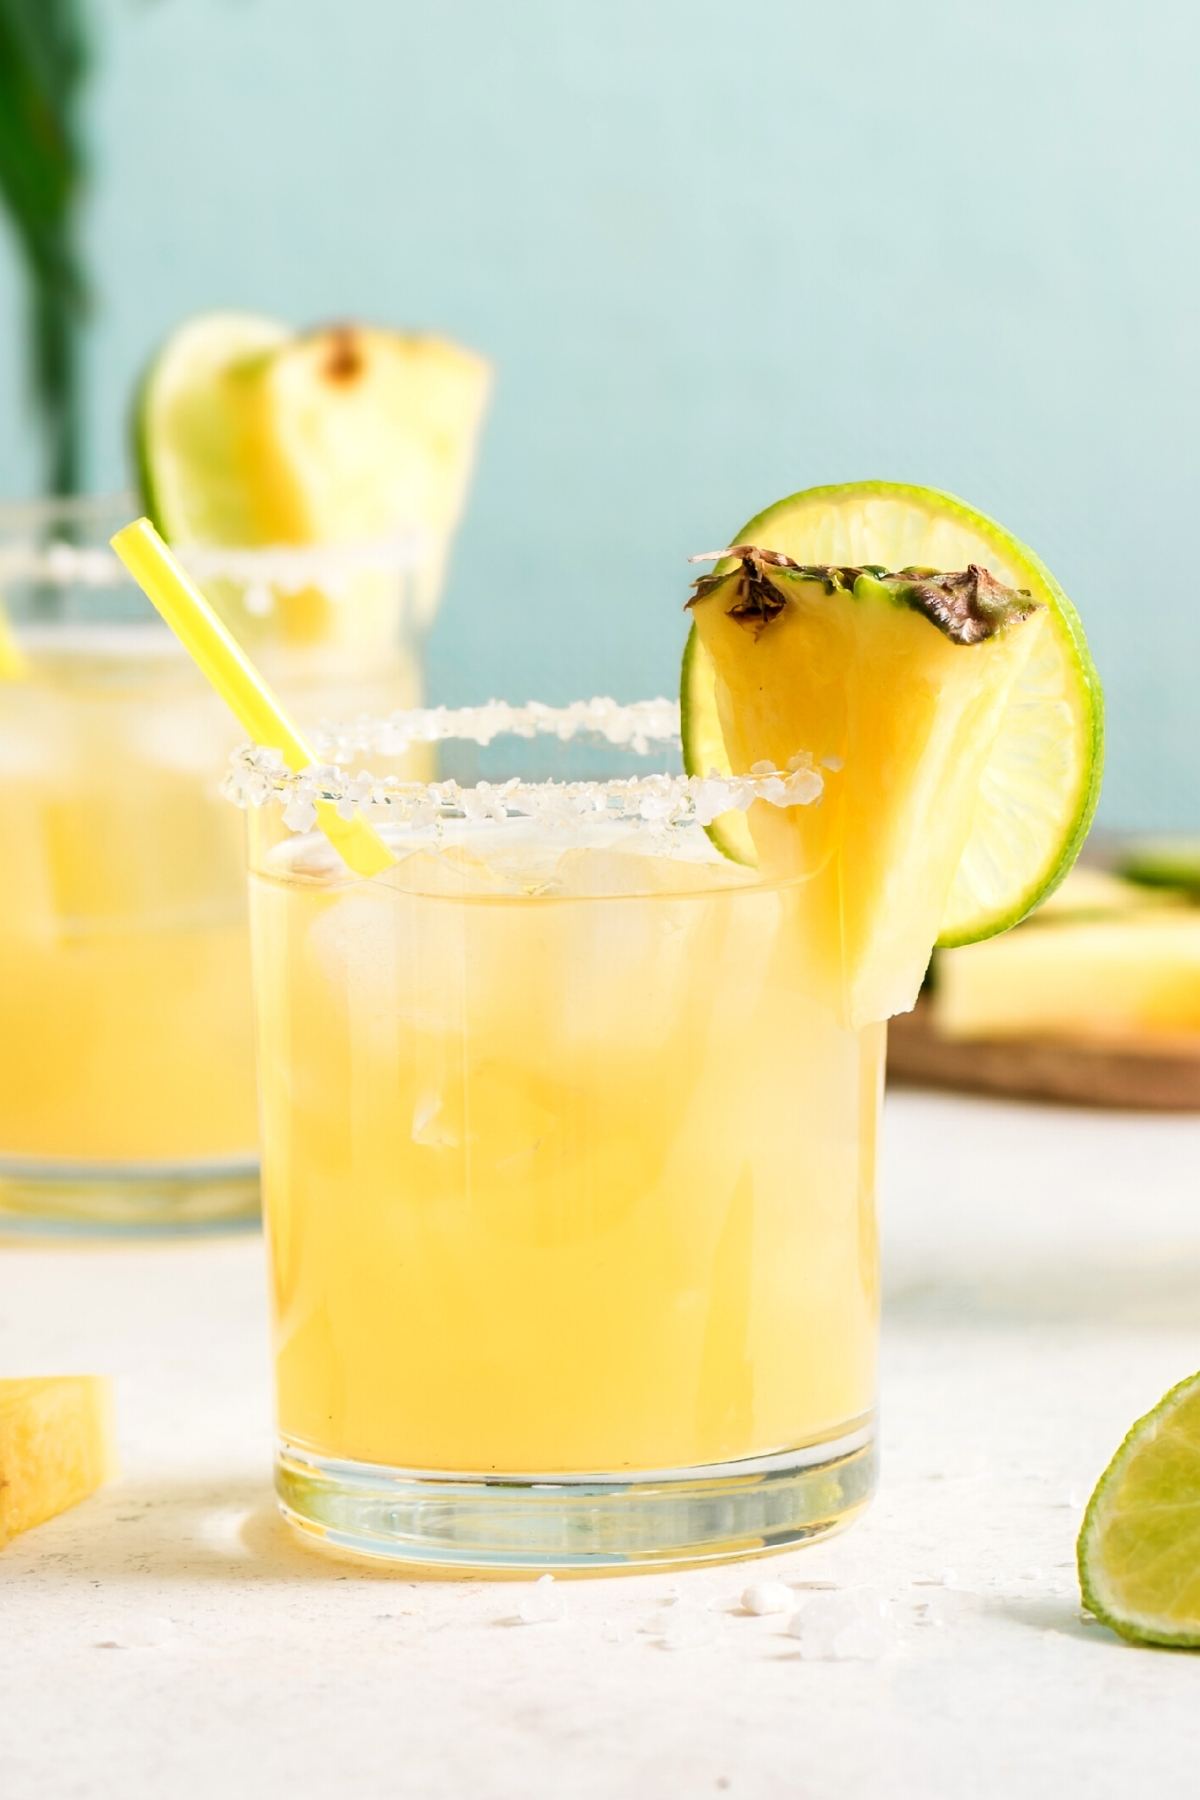 Looking for a low-cost alternative to a tropical destination vacation? This Pineapple Vodka Cocktail is just the thing to mimic the feeling you get in the tropics. The best part? It only takes three ingredients to make!